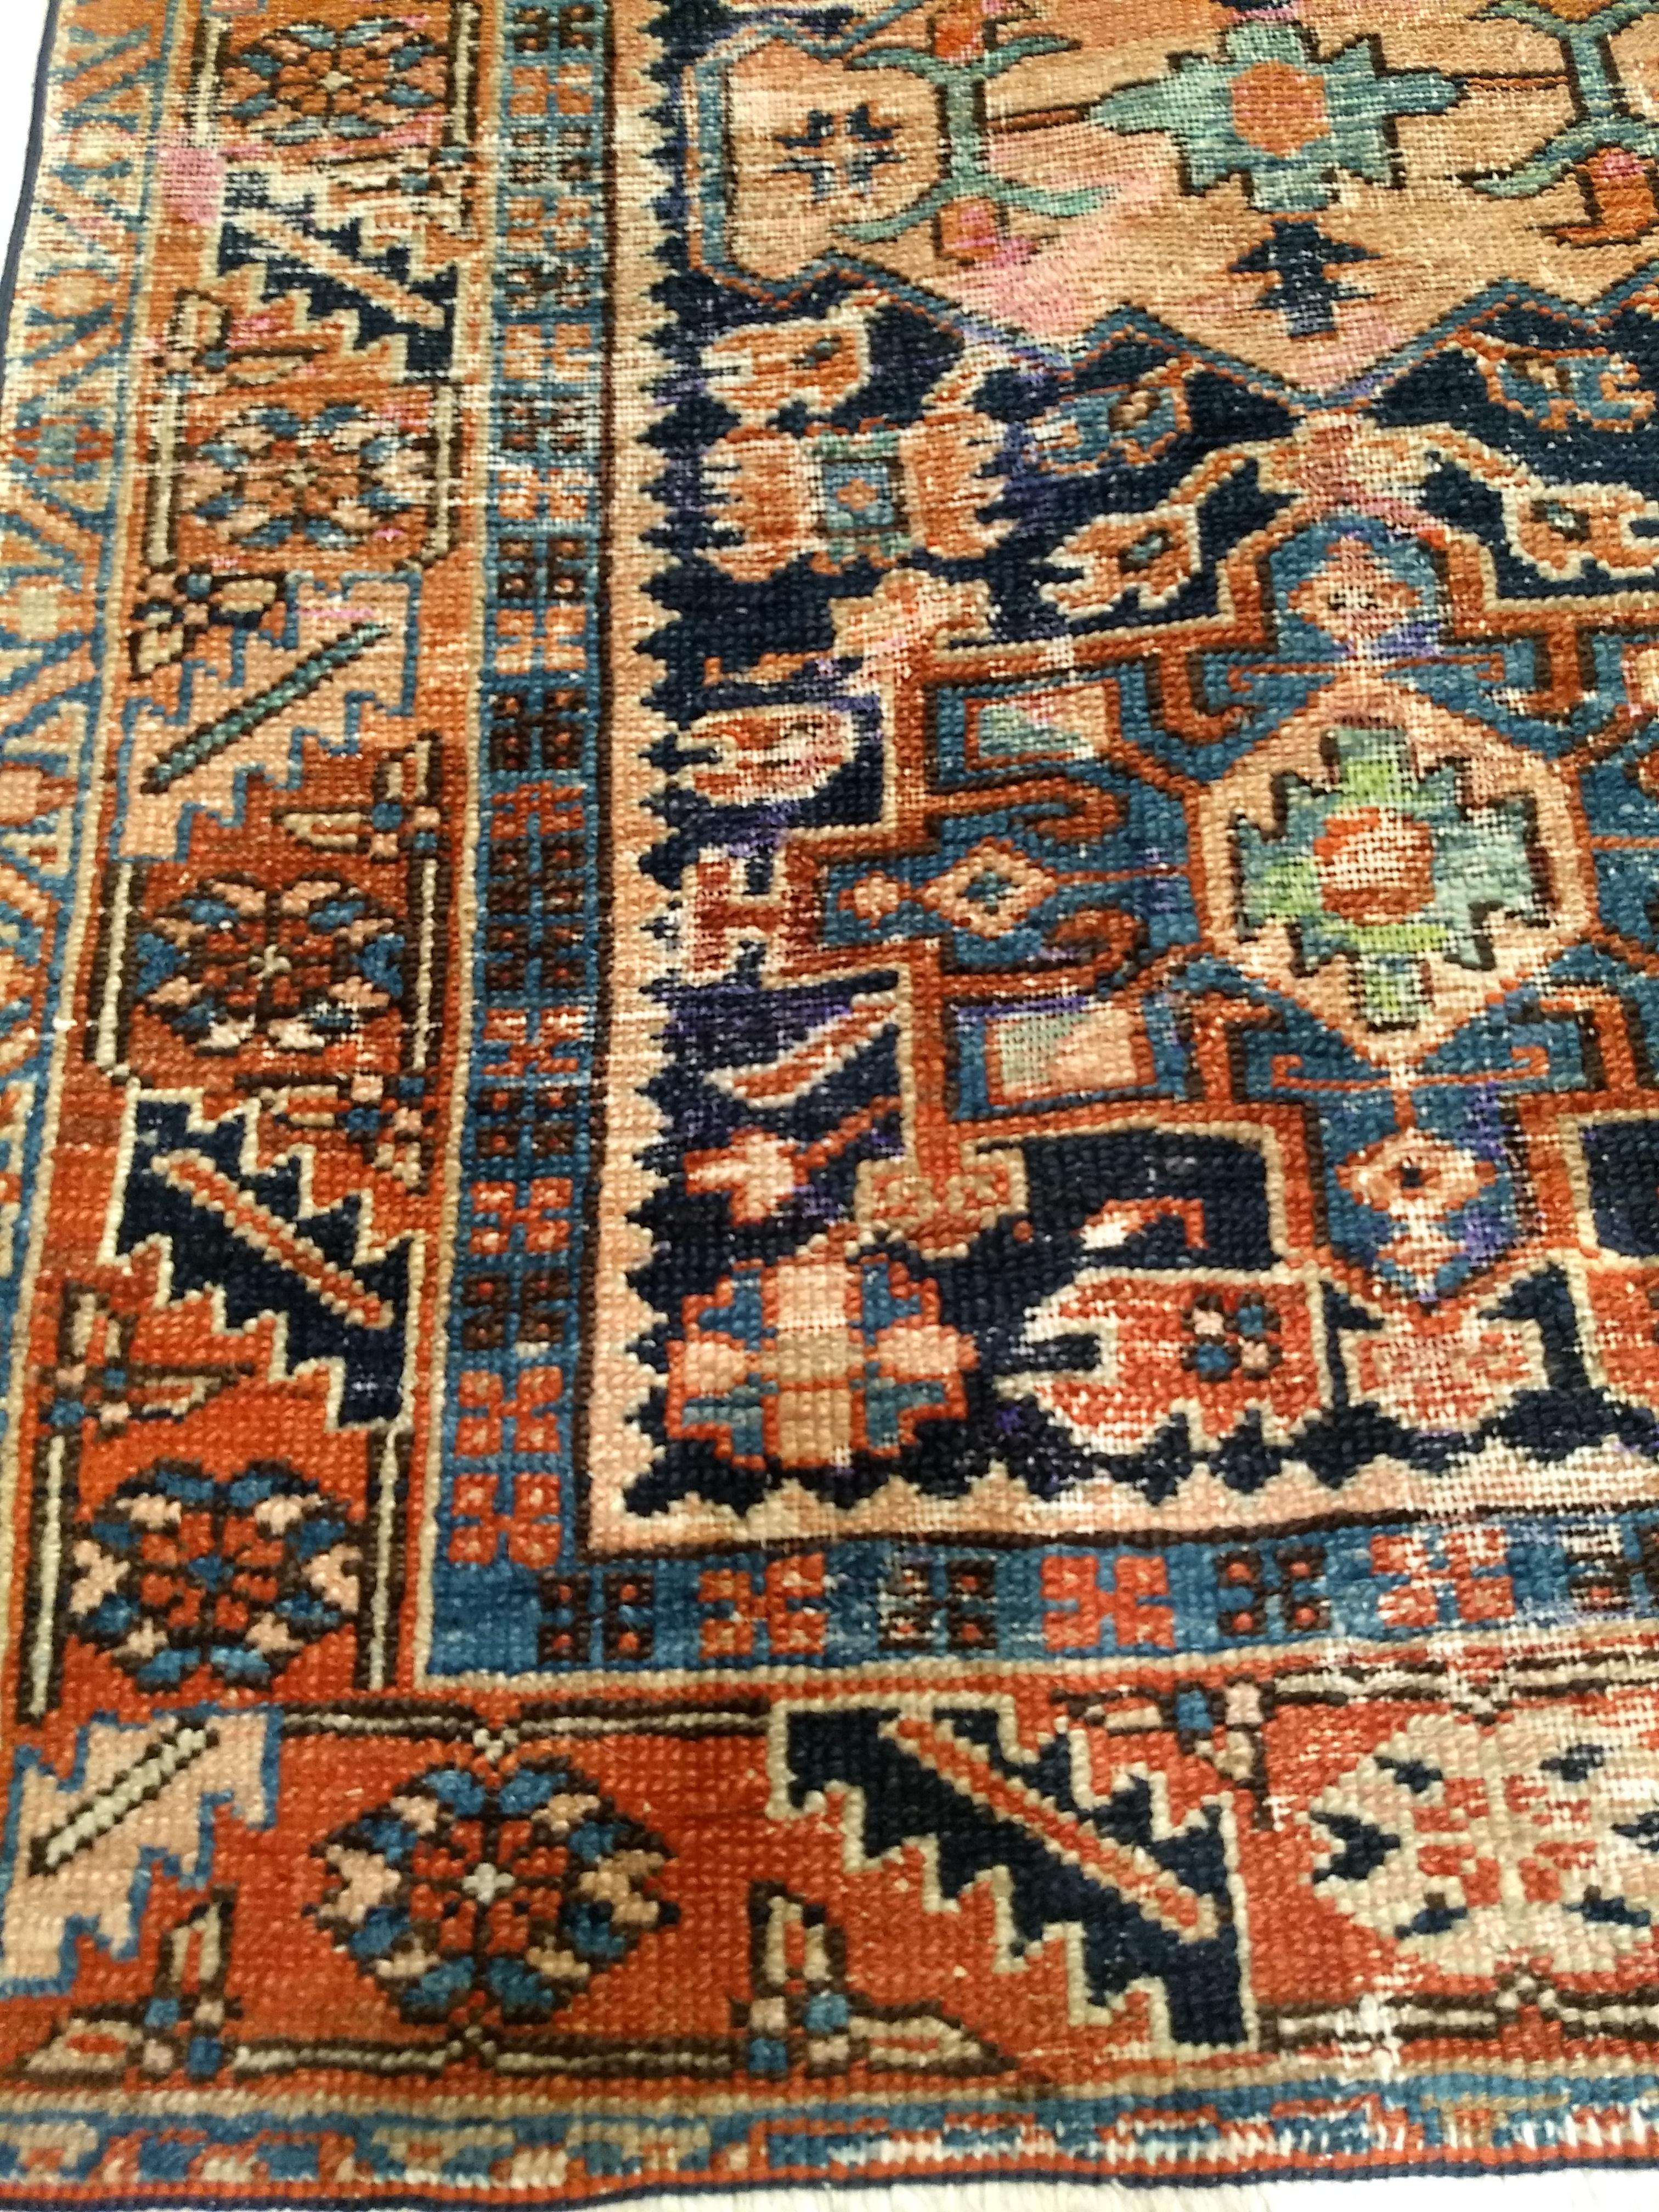 Vintage Persian Heriz Karajah Area Rug in Pale Blue, Pink, Green, Rust Red In Good Condition For Sale In Barrington, IL